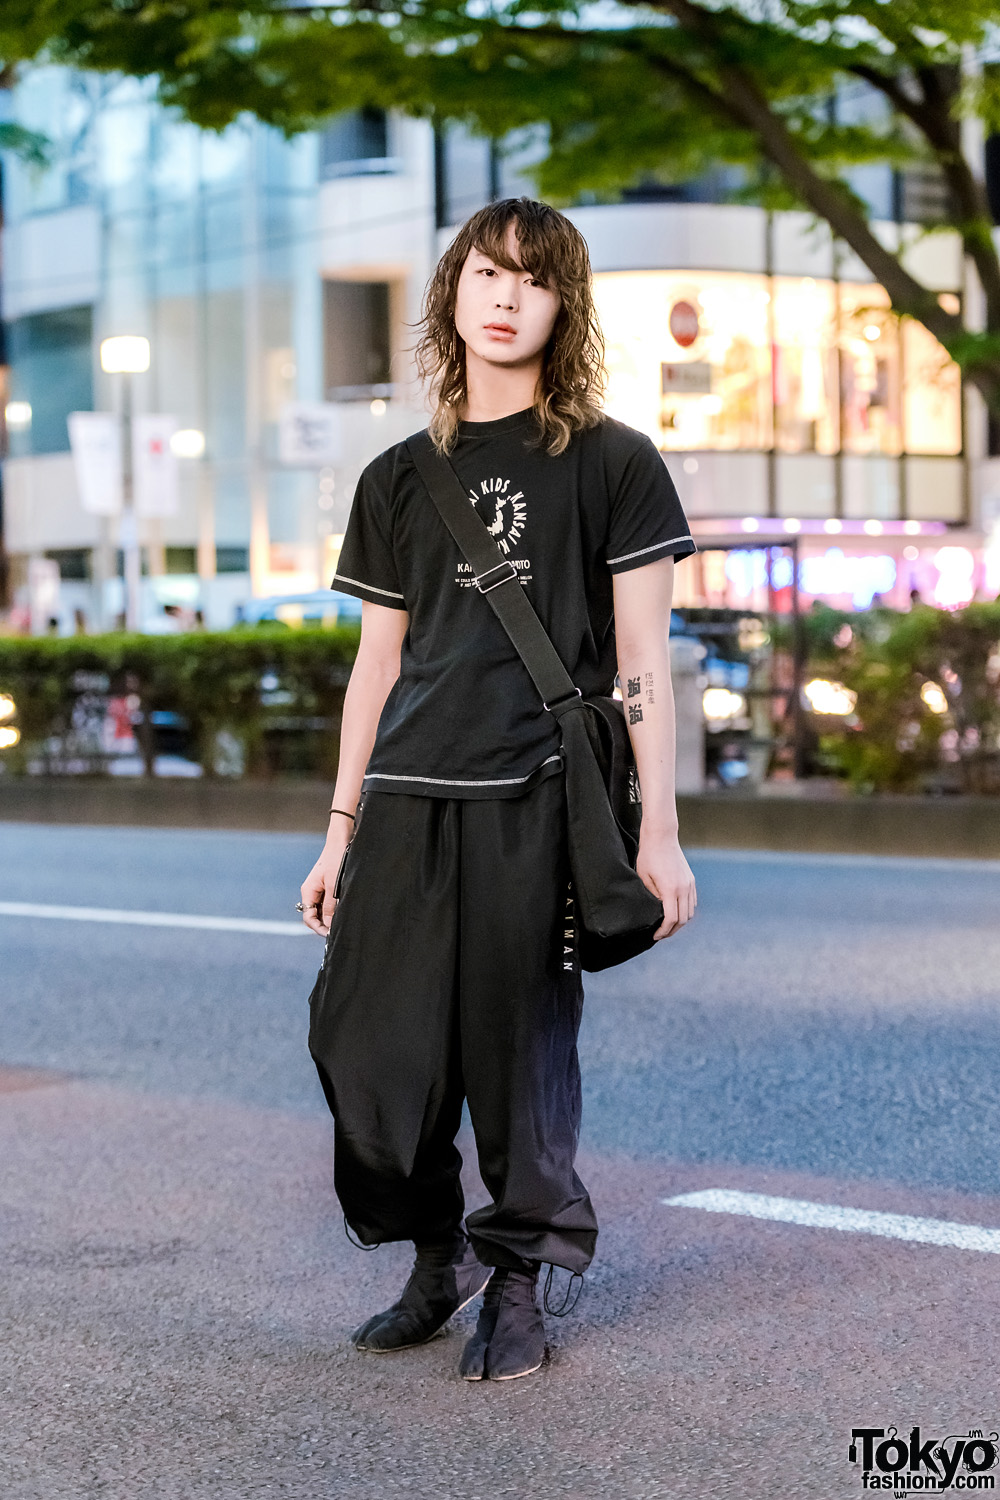 Fashion College Student in All Black Kansai Yamamoto Outfit w